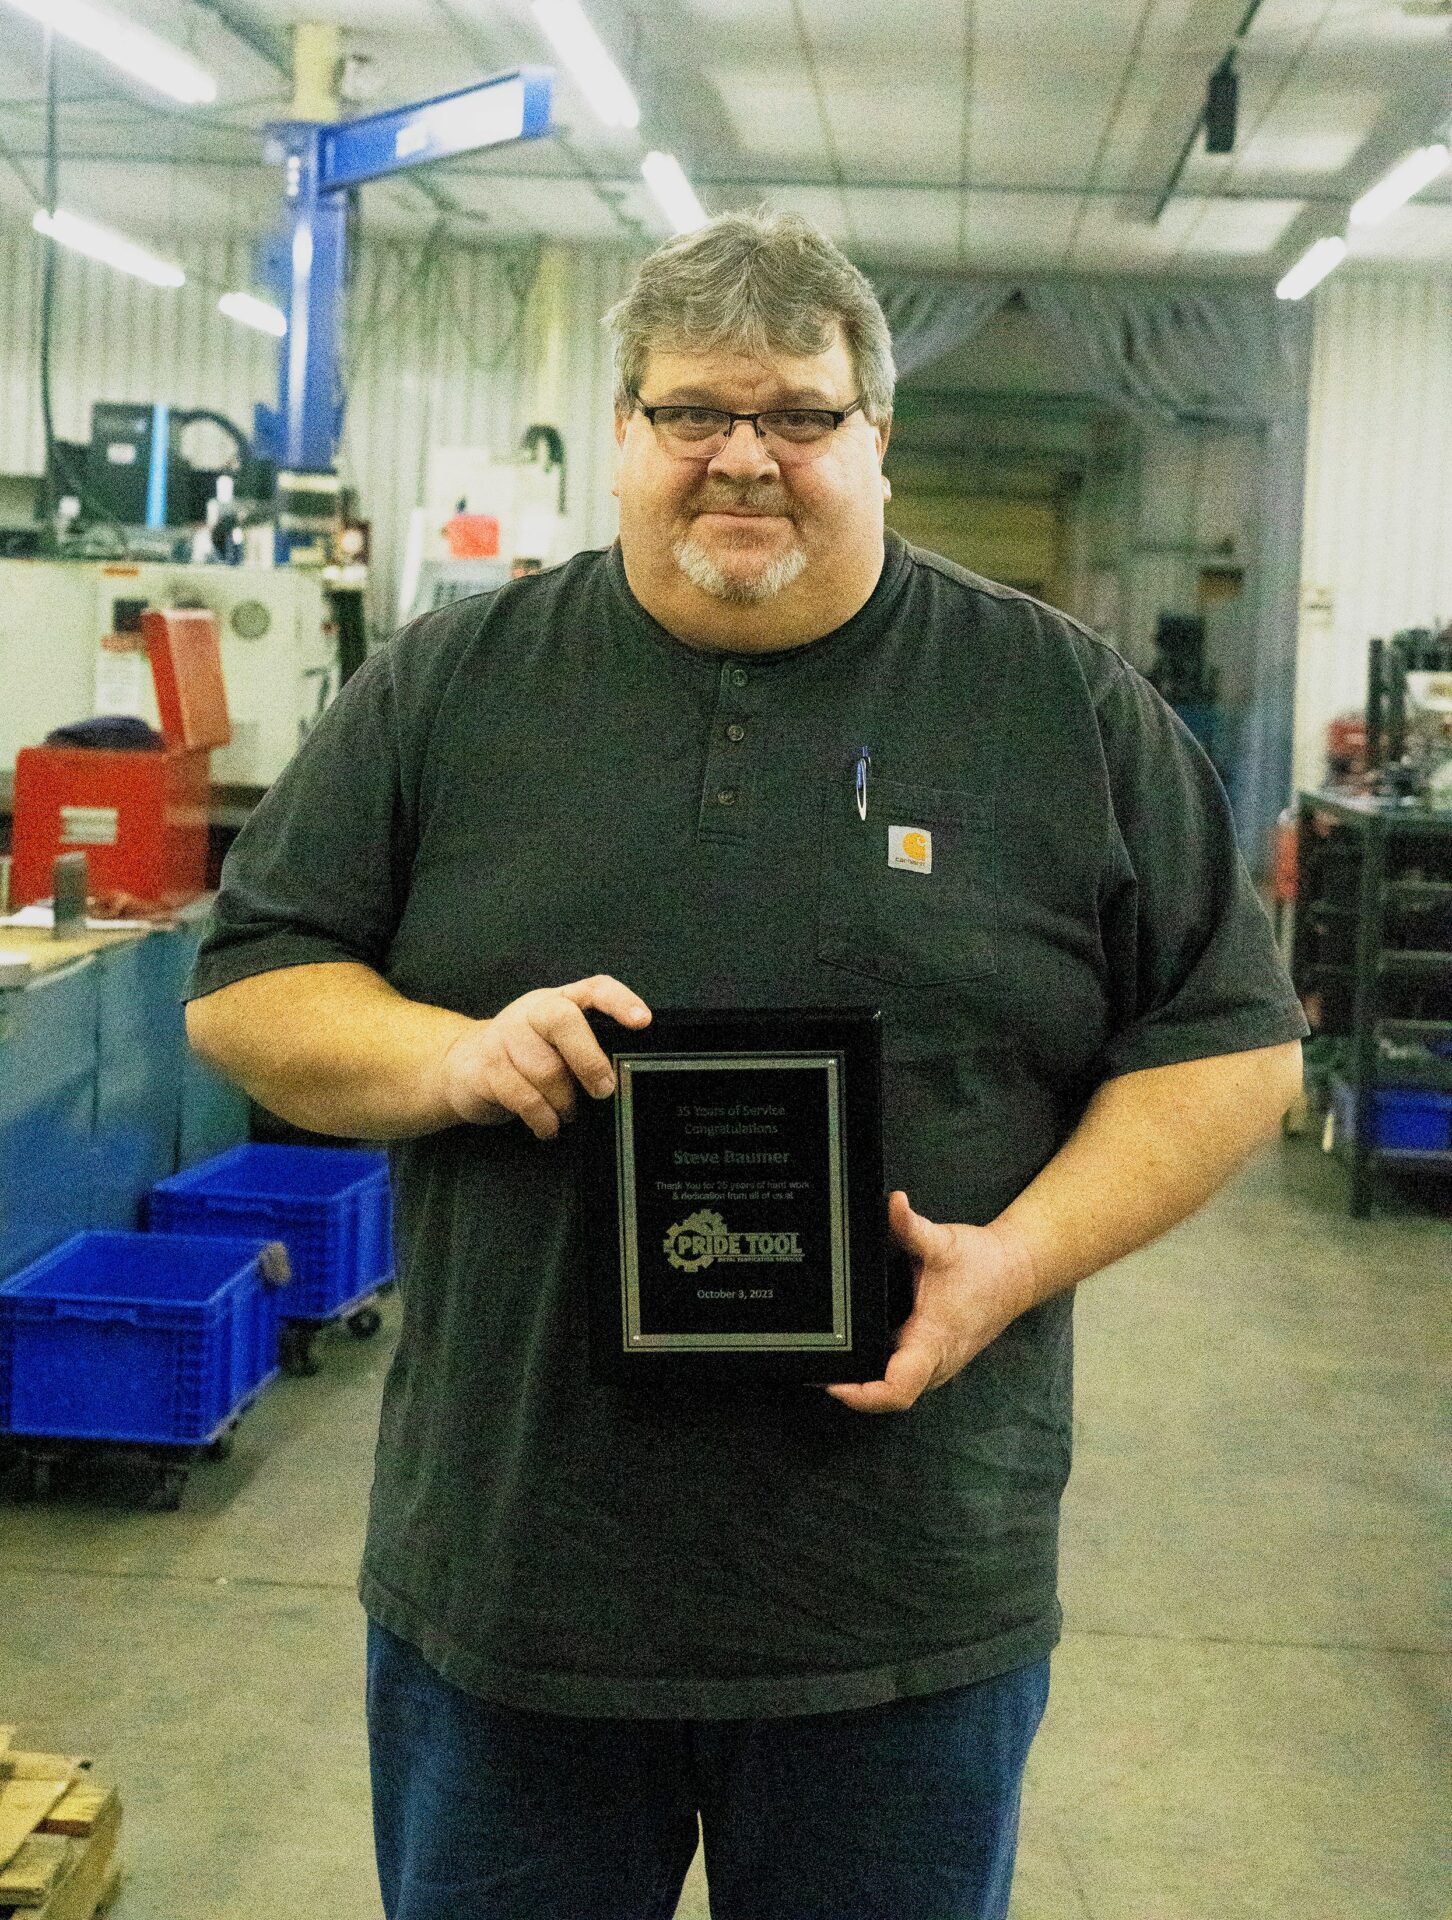 Employee longevity and dediction of Steve Baumer with 35 years of service at Pride Tool.